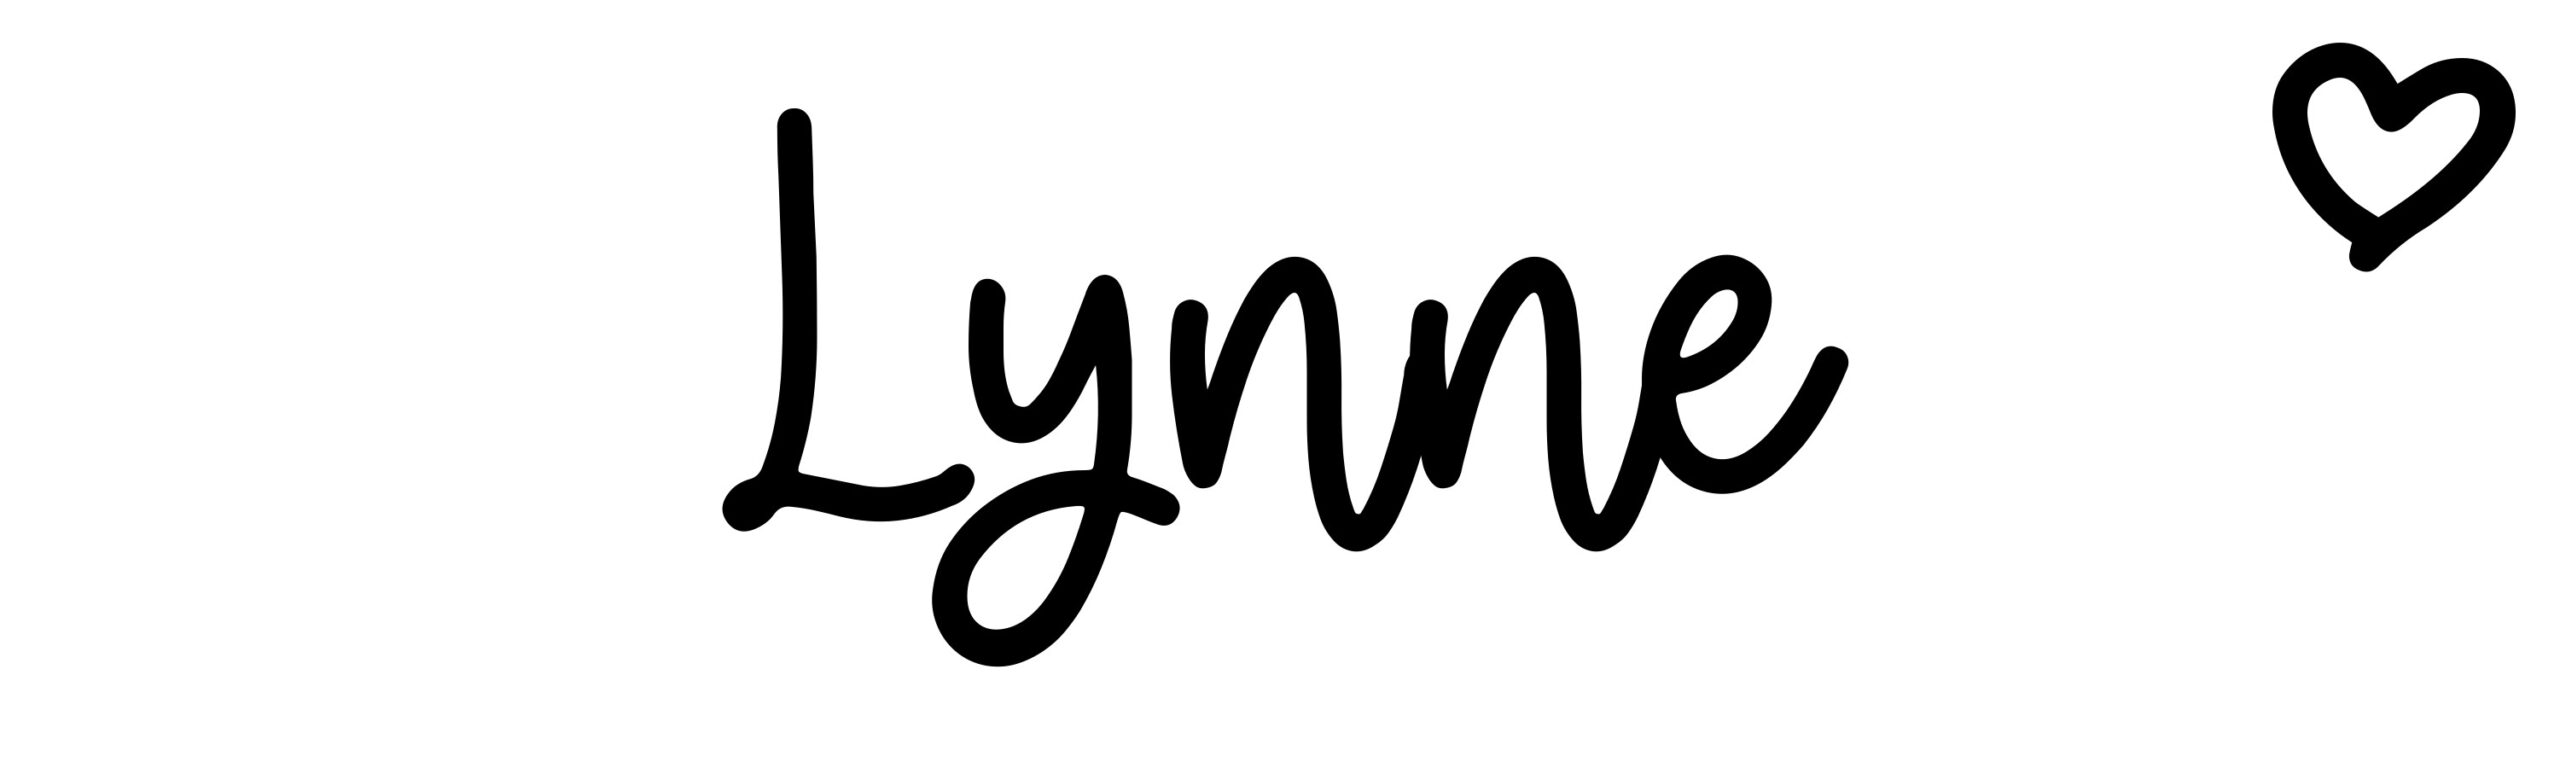 Lynne - Name meaning, origin, variations and more